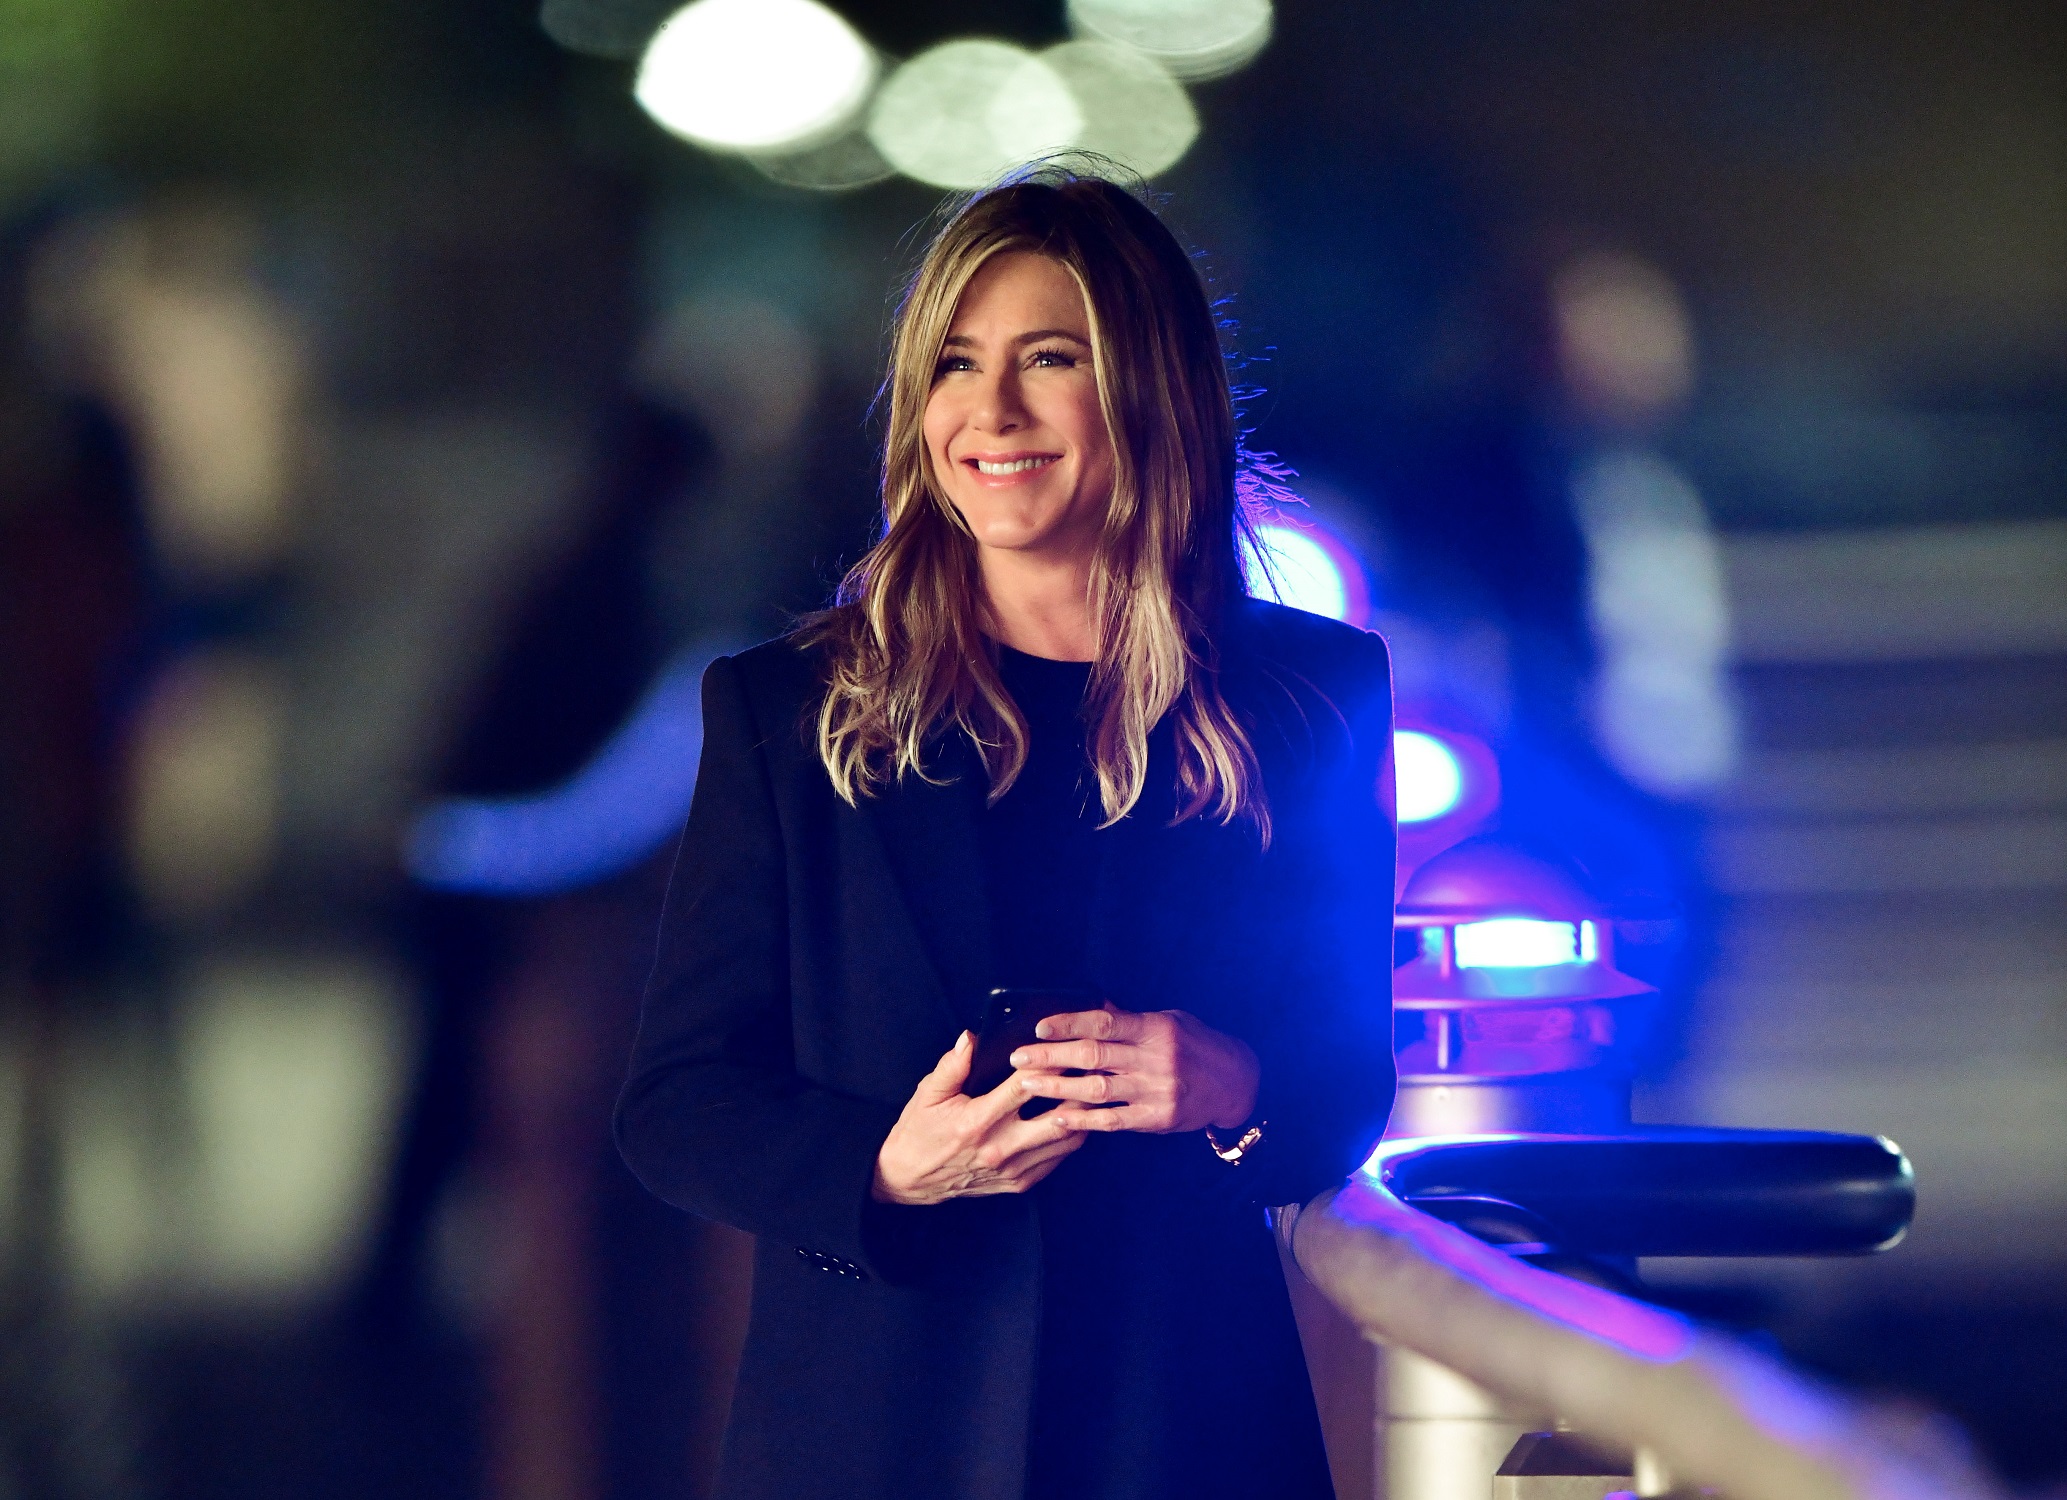 Jennifer Aniston on location for 'The Morning Show'